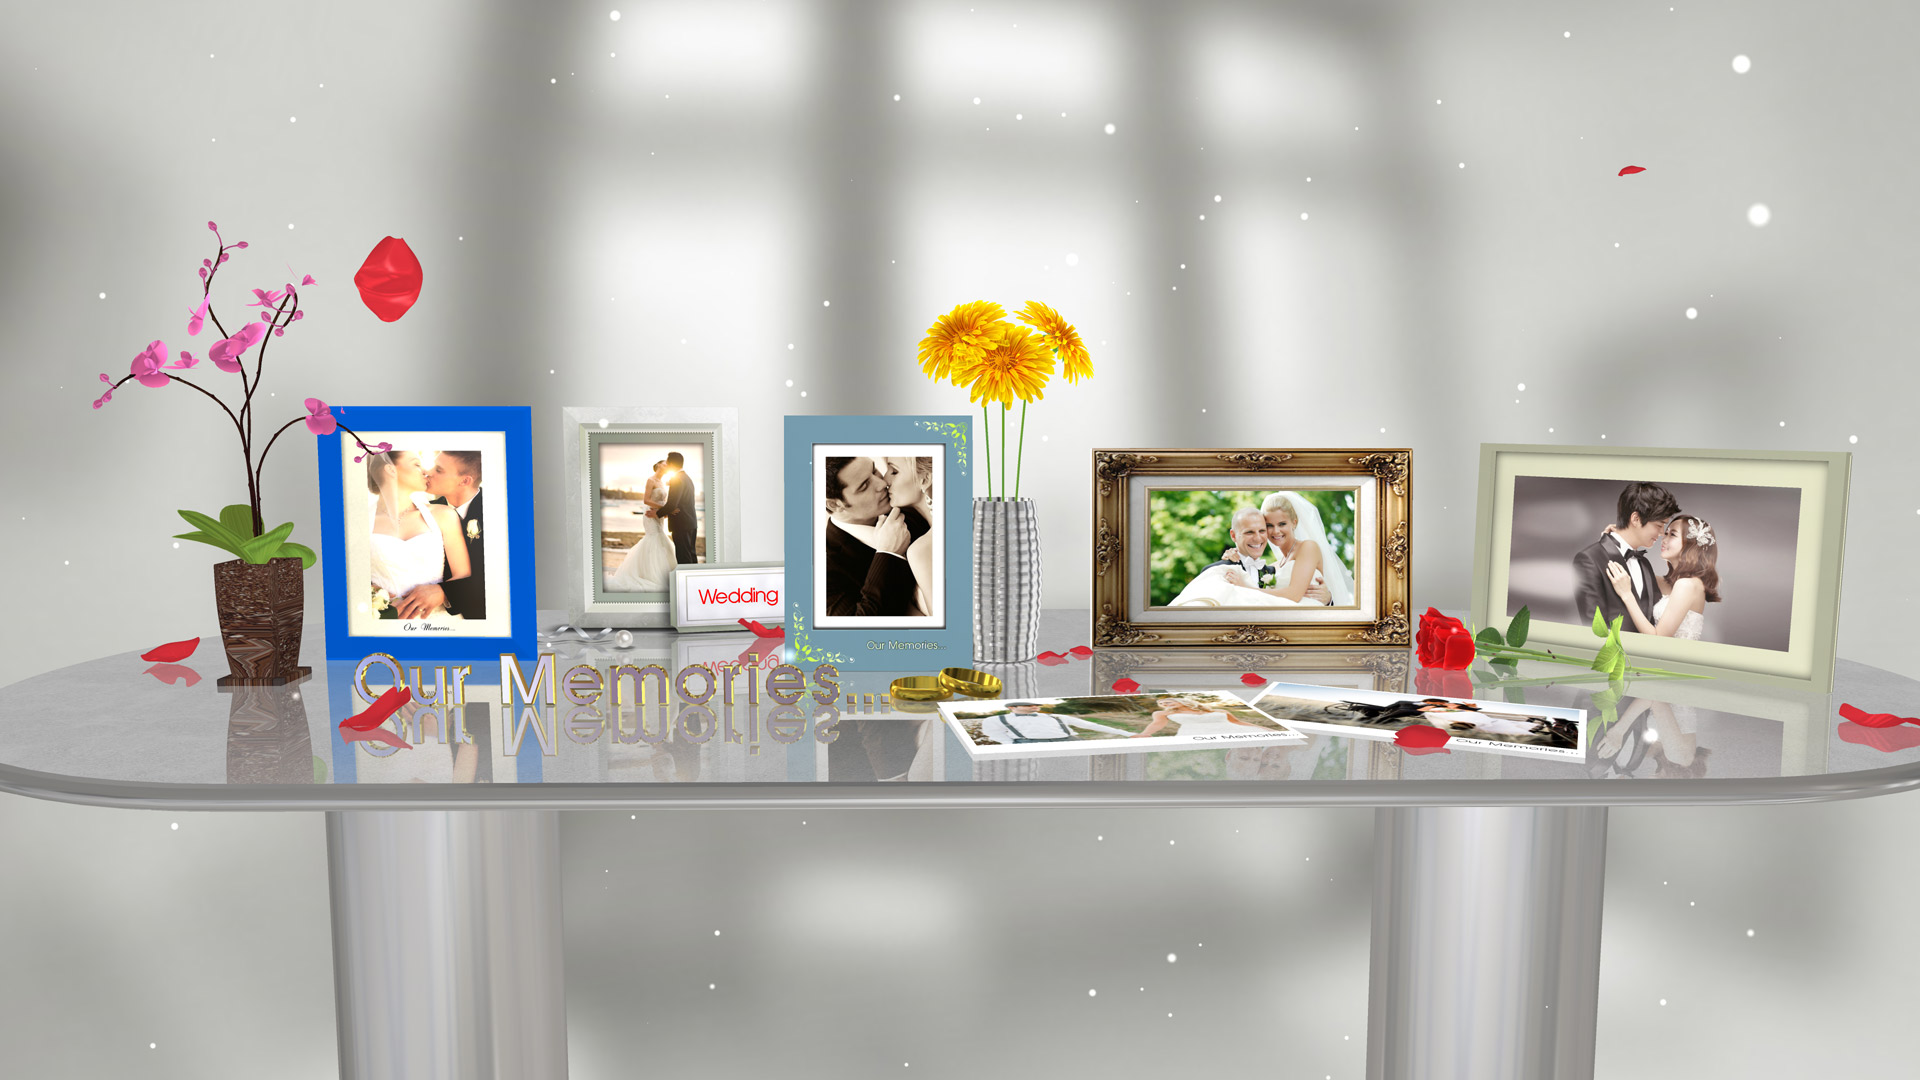 blufftitler wedding projects free download